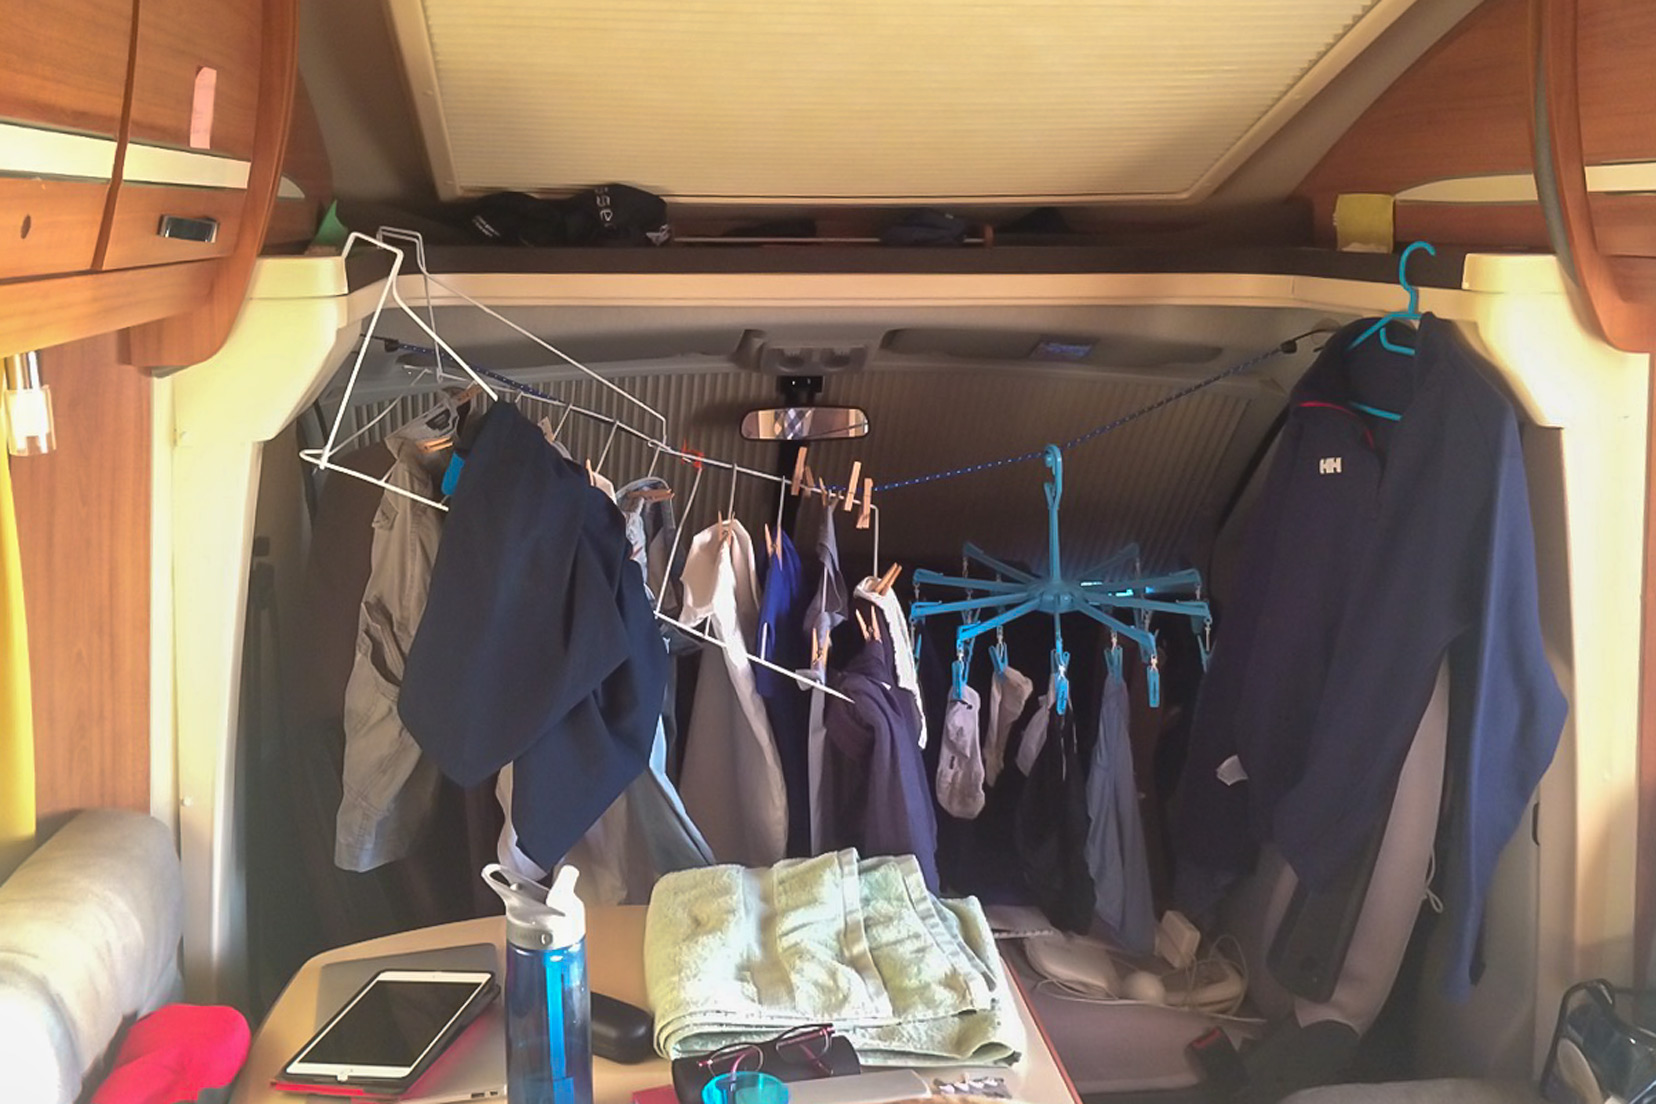 drying-our-clothes-inside-the-campervan